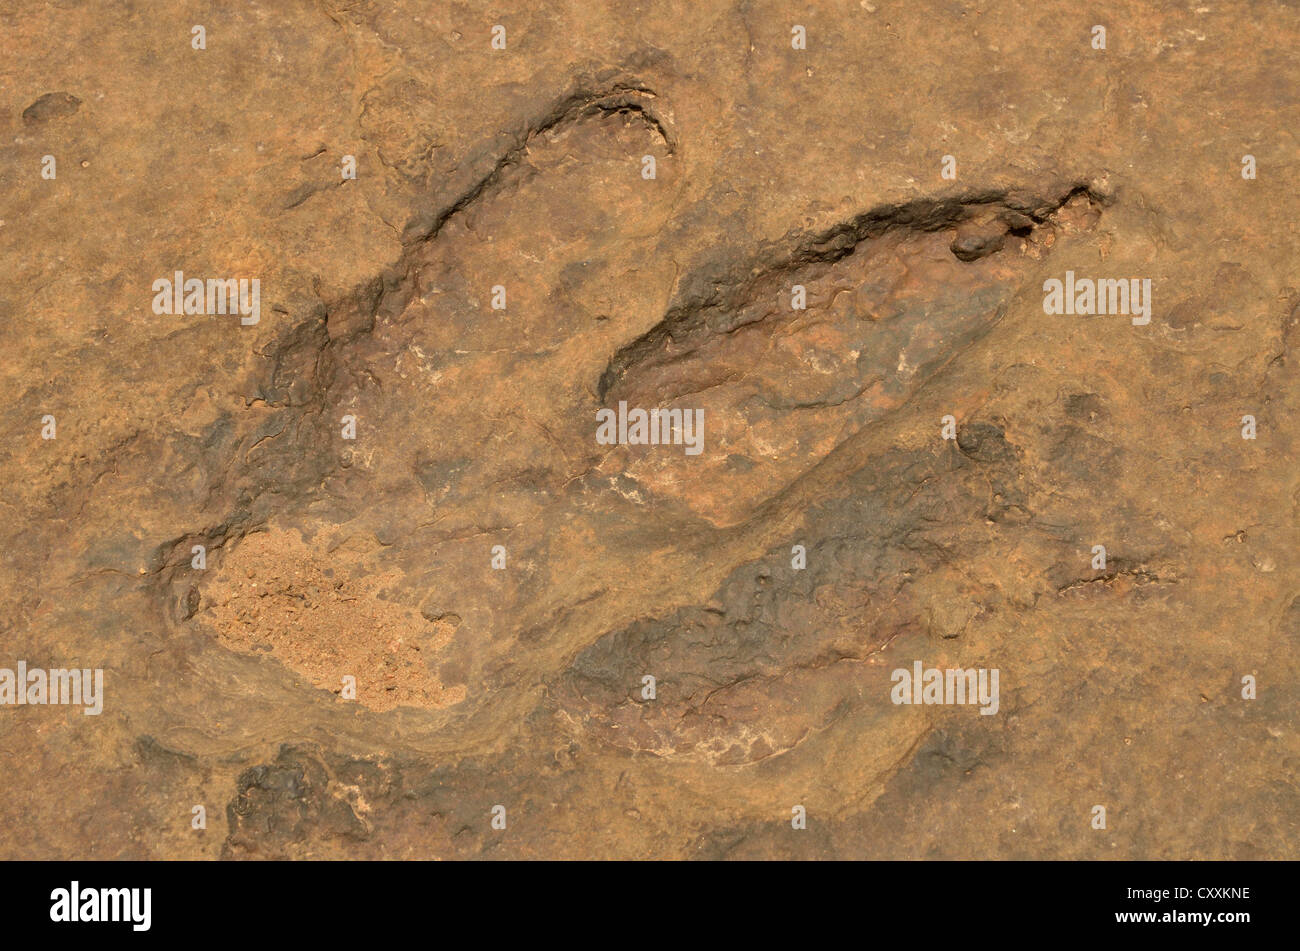 Fossilized footprints of a Tyrannosaurus rex near the village of Mananga, Cameroon, Central Africa, Africa Stock Photo